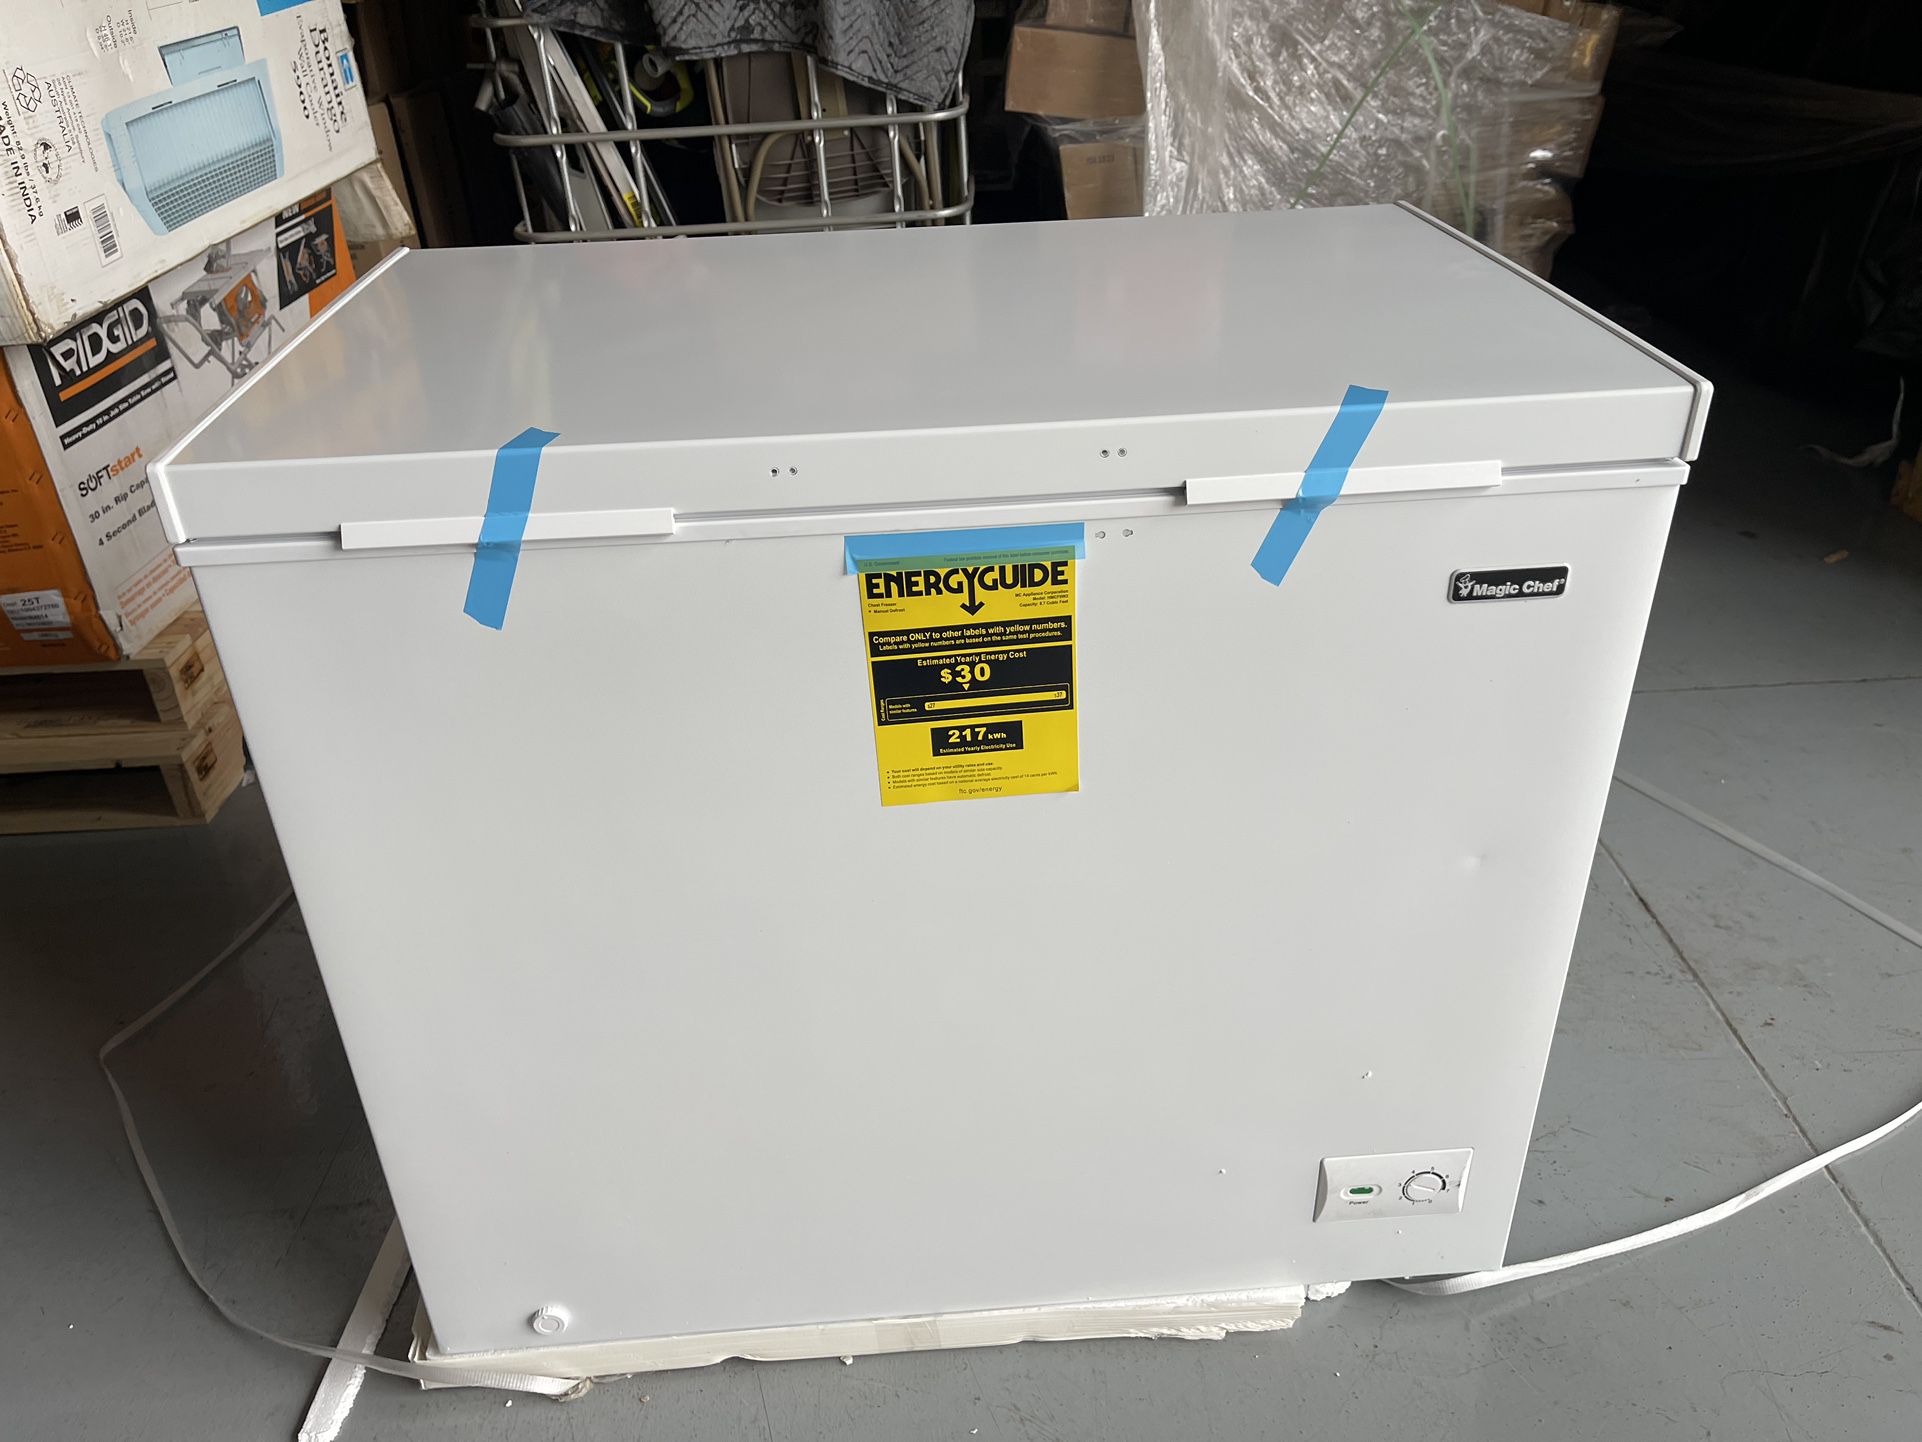 New Magic Chef 8.7 cu. ft. Manual Defrost Chest Freezer in White New * has two small dents, doesn’t not affect performance 